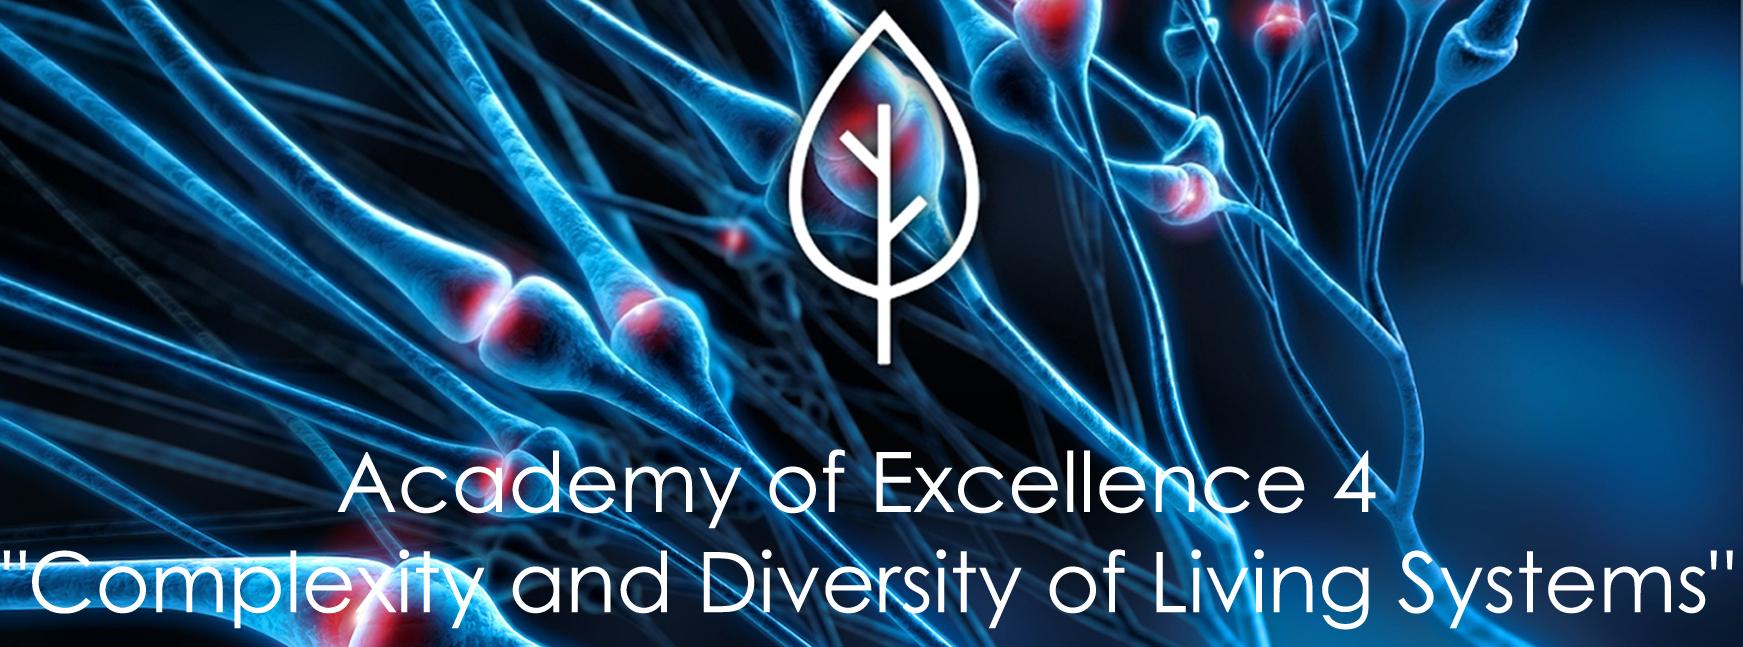 Academy of Excellence 4